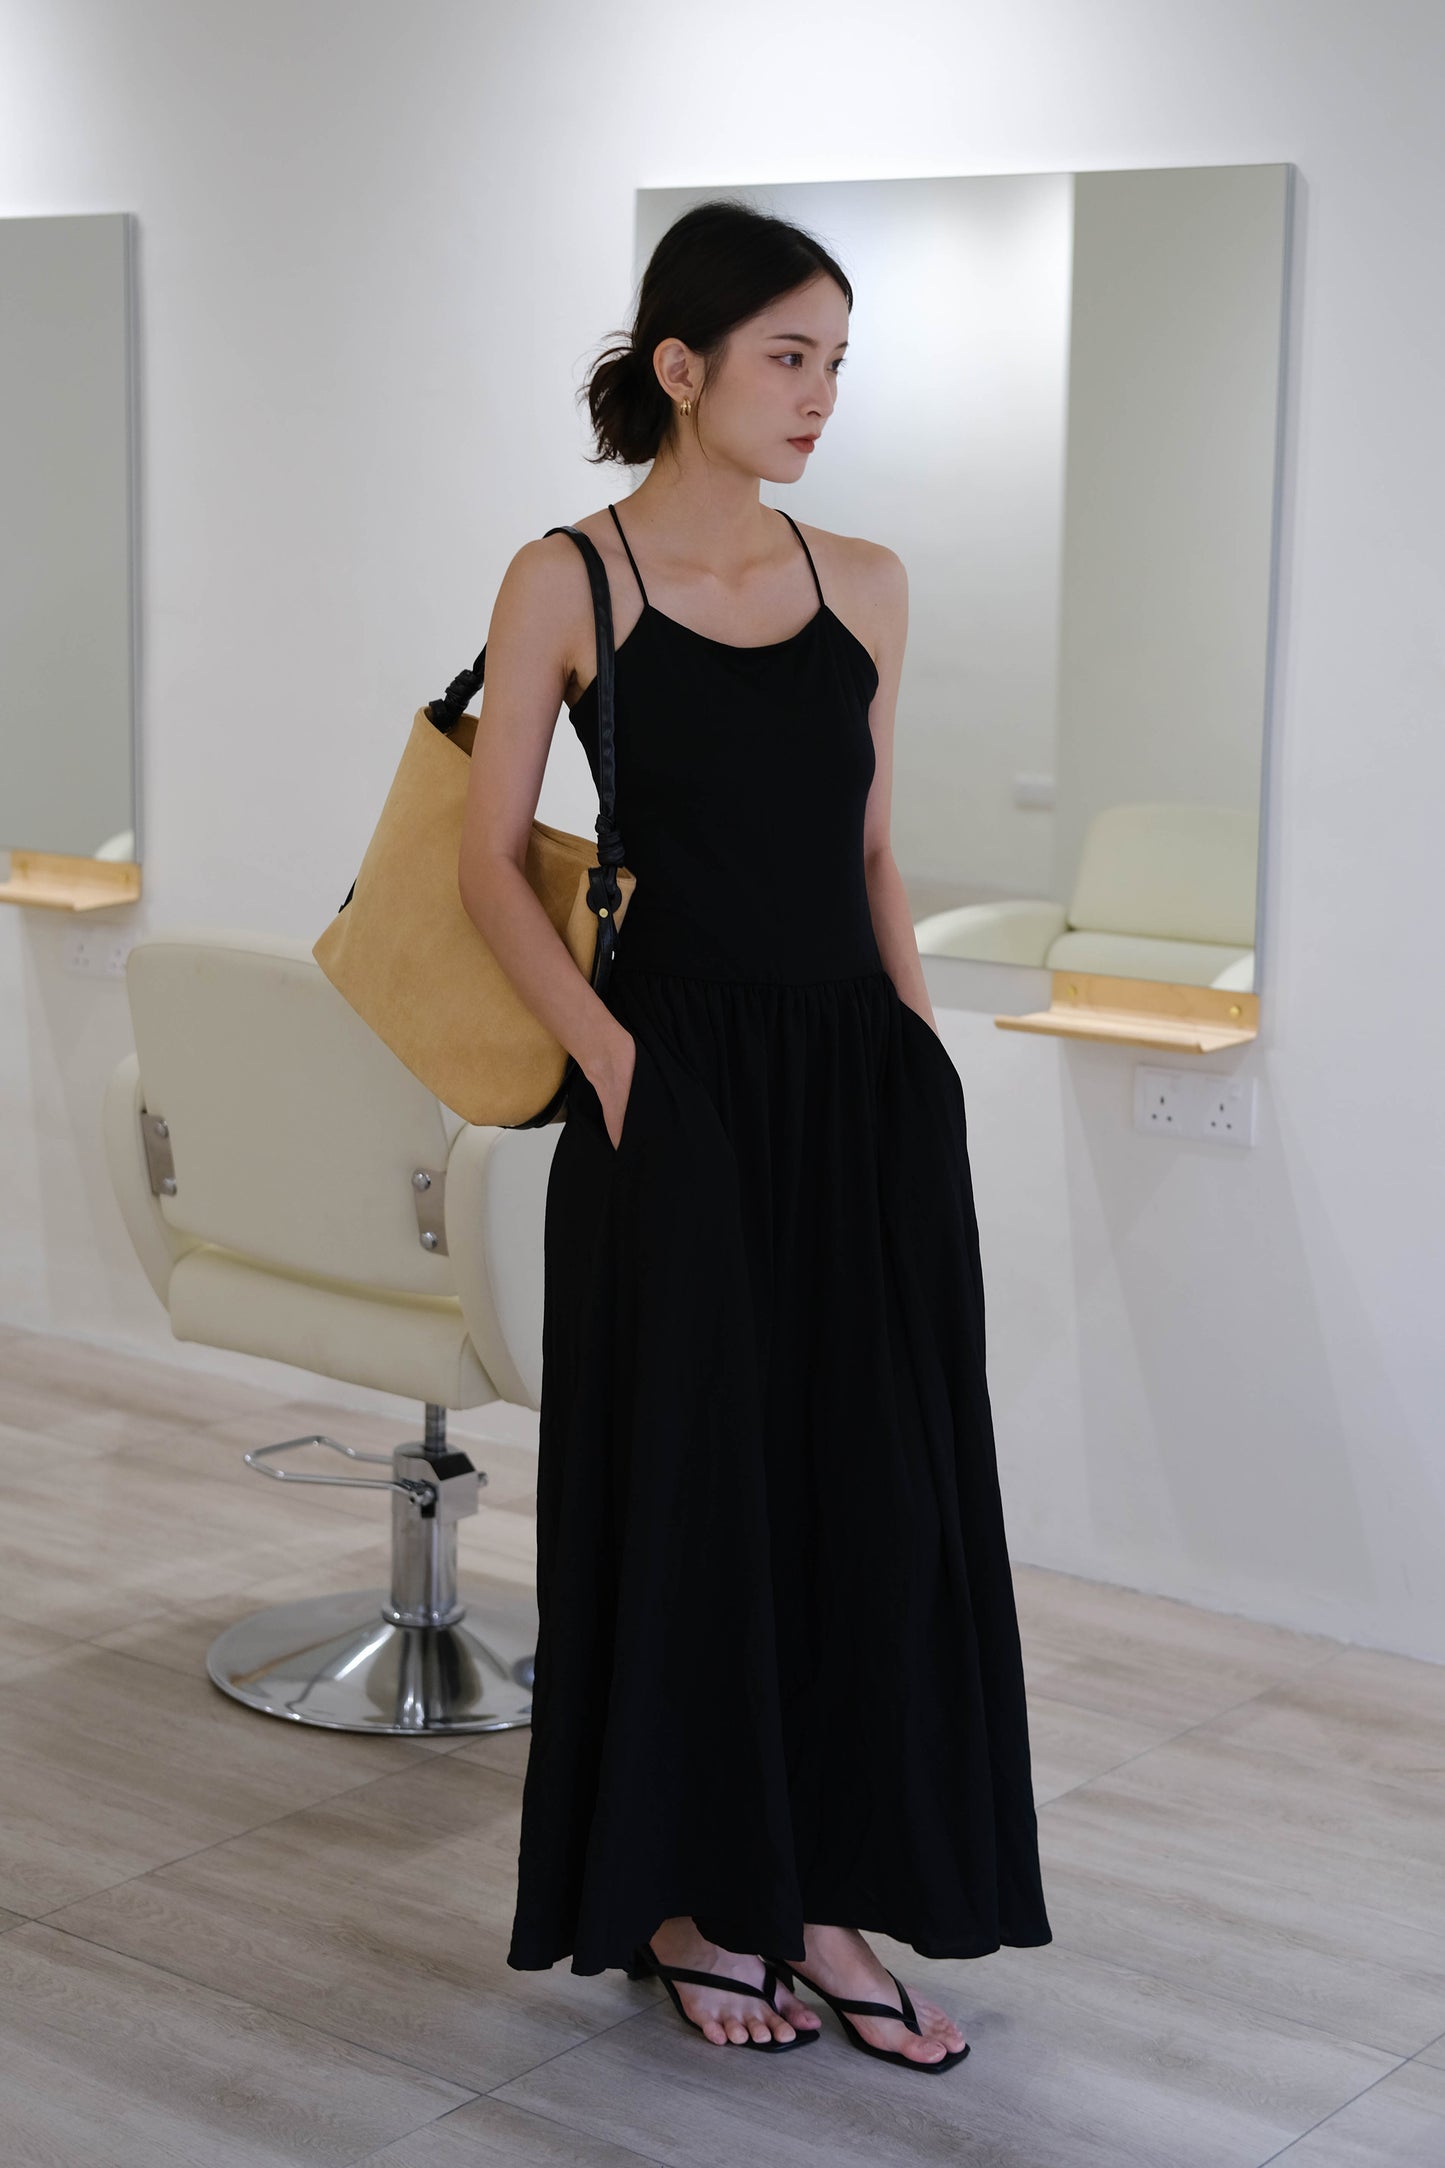 Halter neck contrast color stitching sling dress in classic black